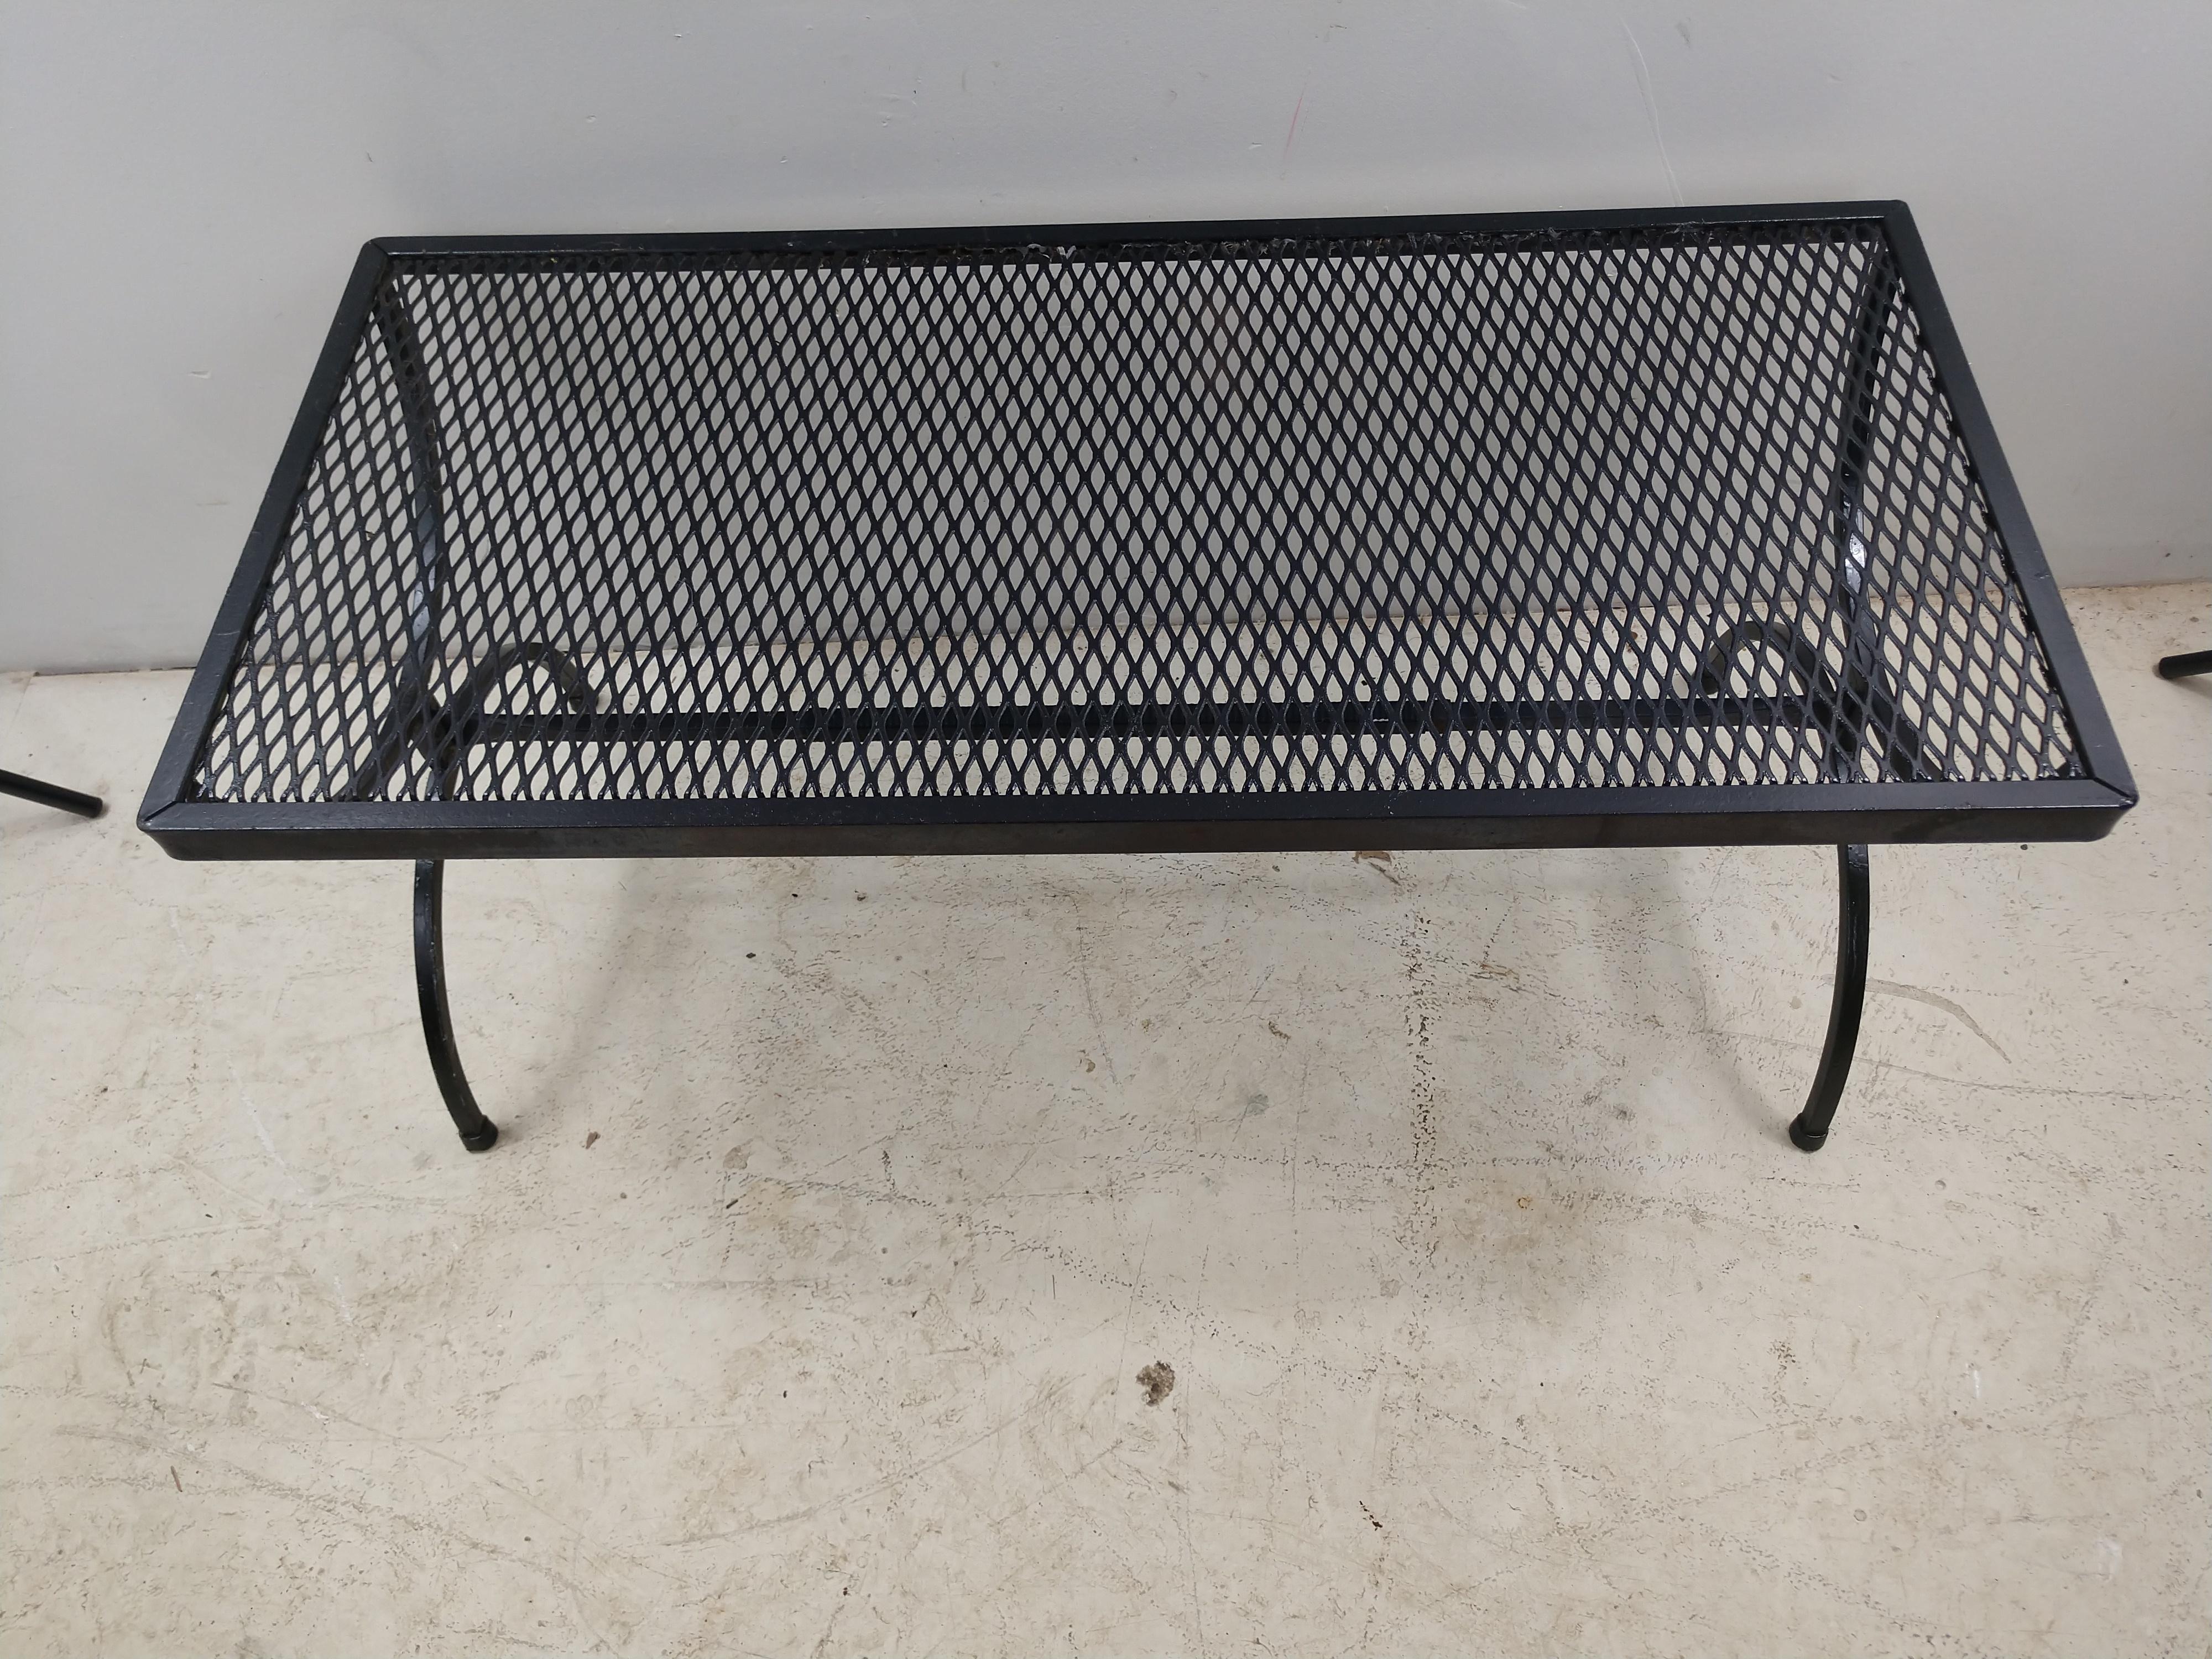 Very cool shape, oblong with great form to the legs. Mesh top and has plastic feet for protection. Recently sprayed black. Salterini furniture is always construction well and with great design.